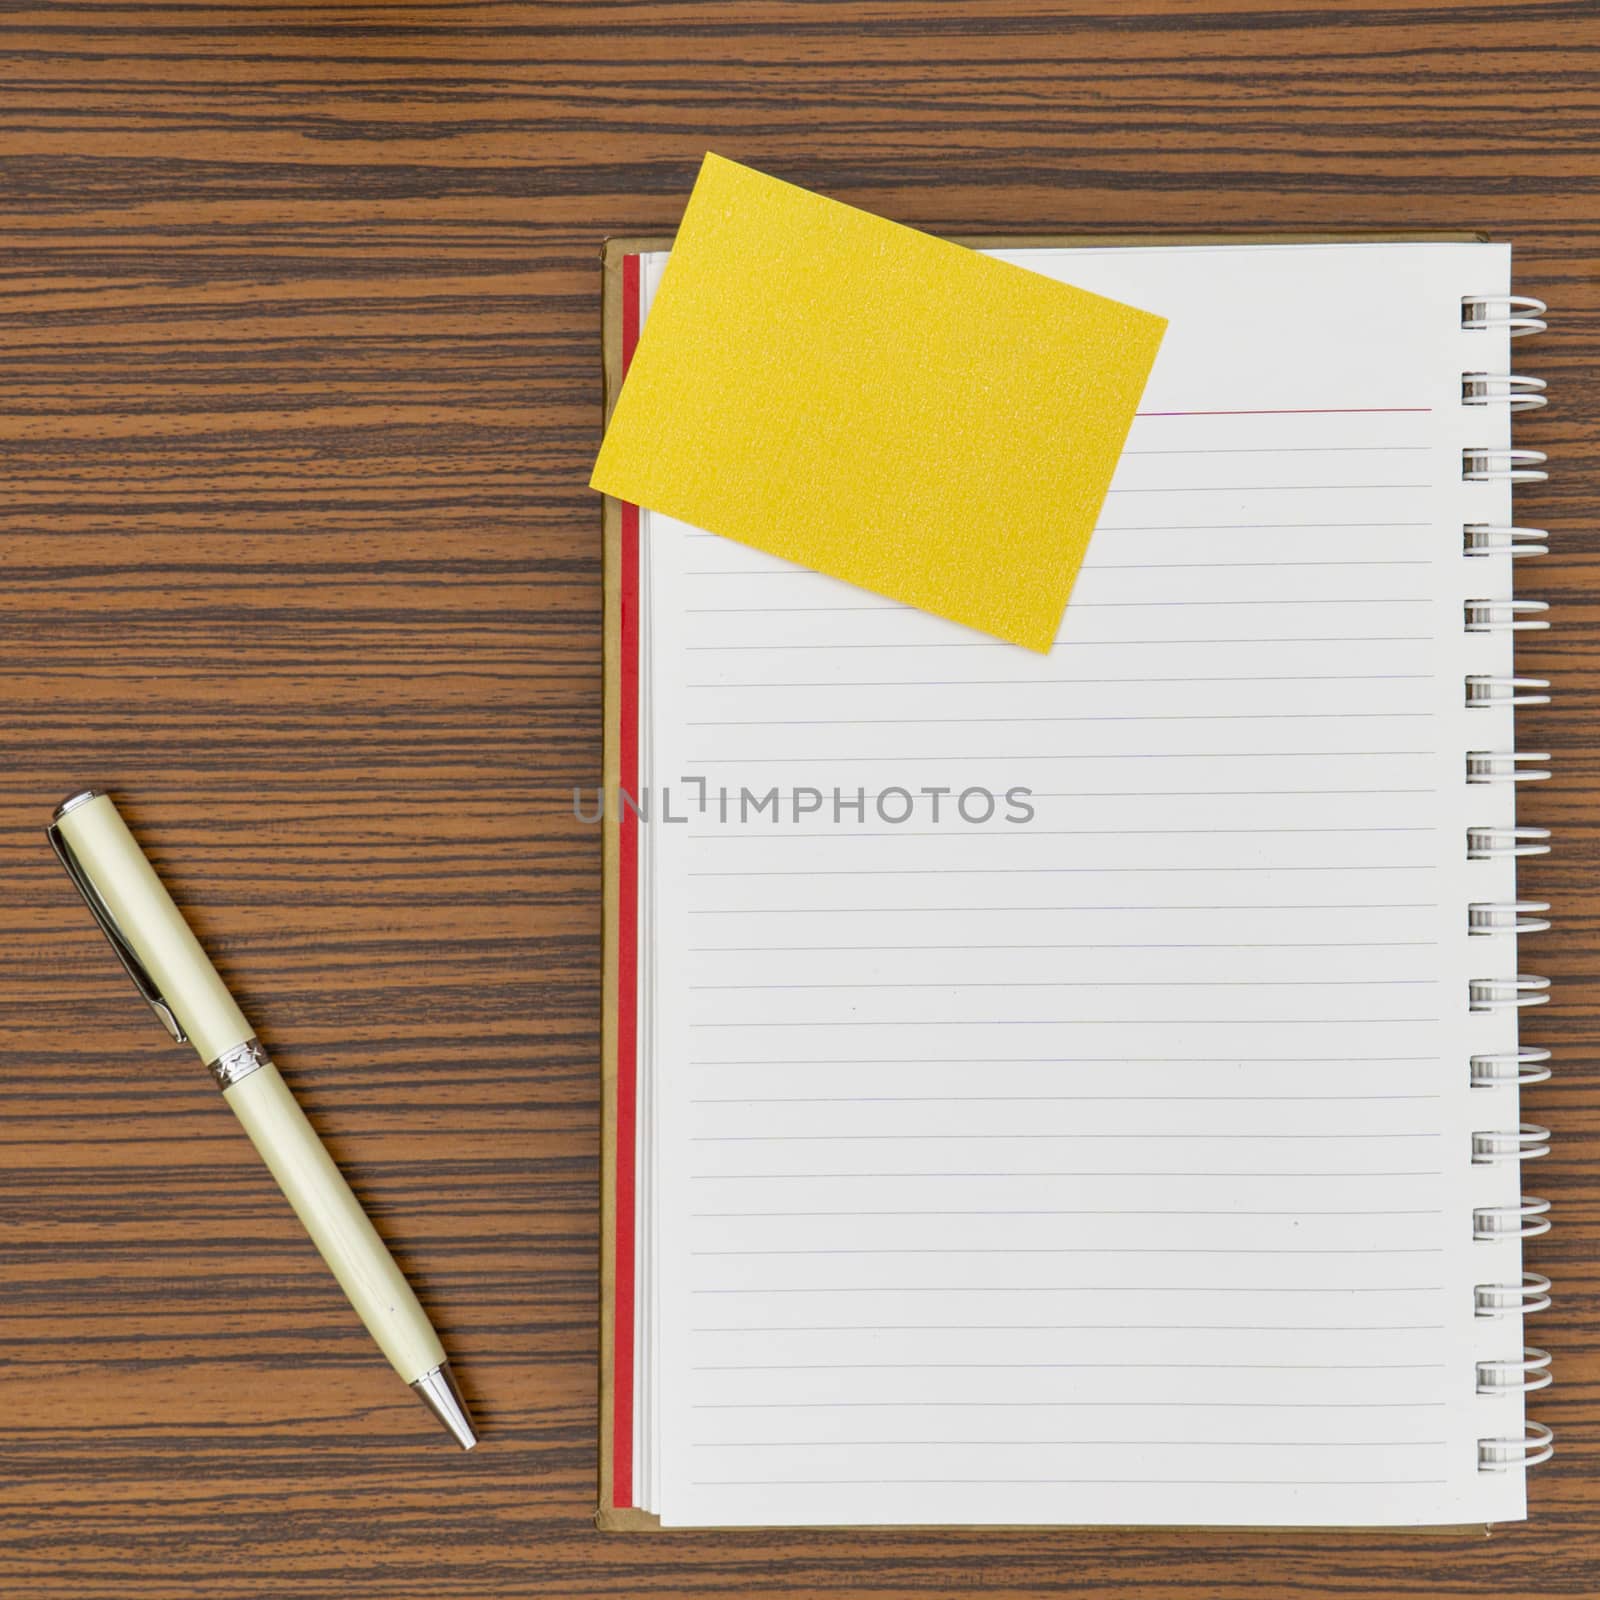 Personal notepad, yellow paper note and a pen on a zebra wood brown striped table.